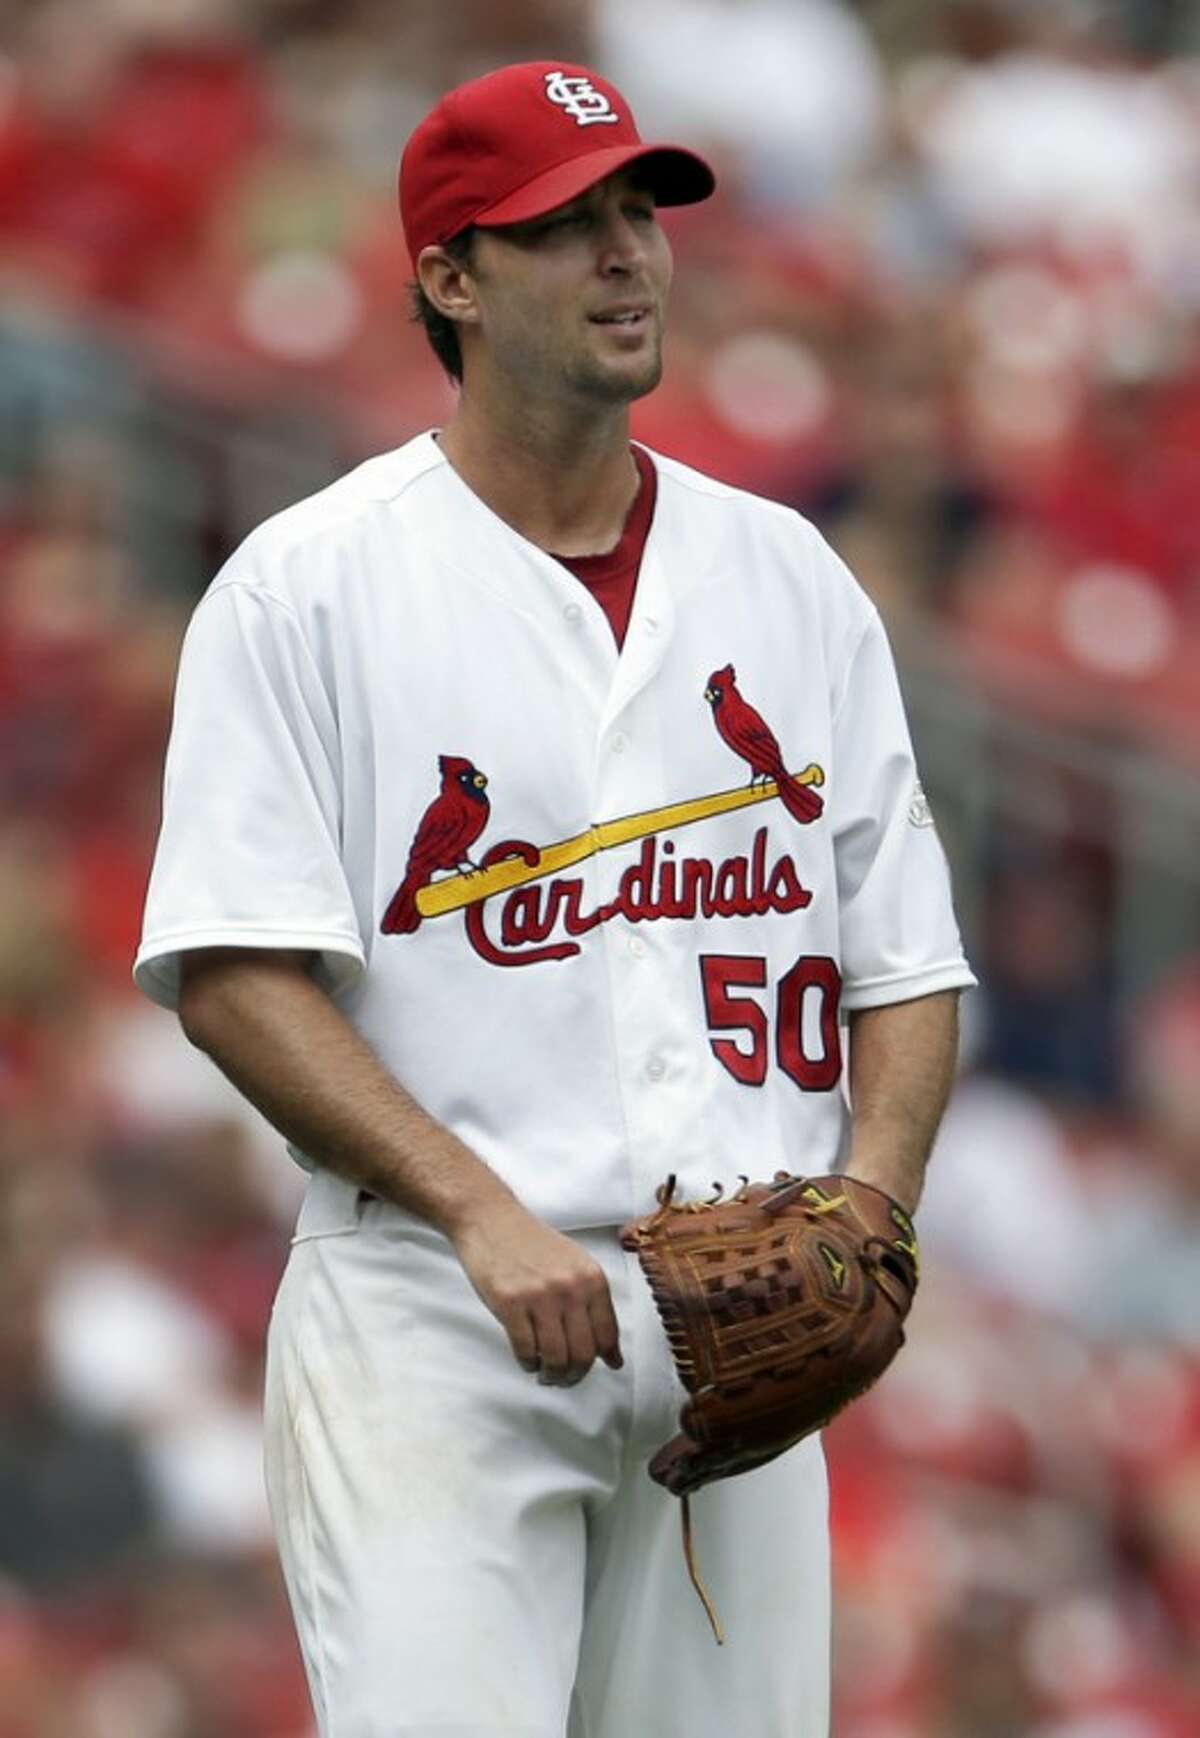 St. Louis Cardinals starting pitcher Adam Wainwright watches as a ball hit for a three-run home run by New York Mets' Ike Davis leaves the park during the fifth inning of a baseball game Wednesday, Sept. 5, 2012, in St. Louis. (AP Photo/Jeff Roberson)